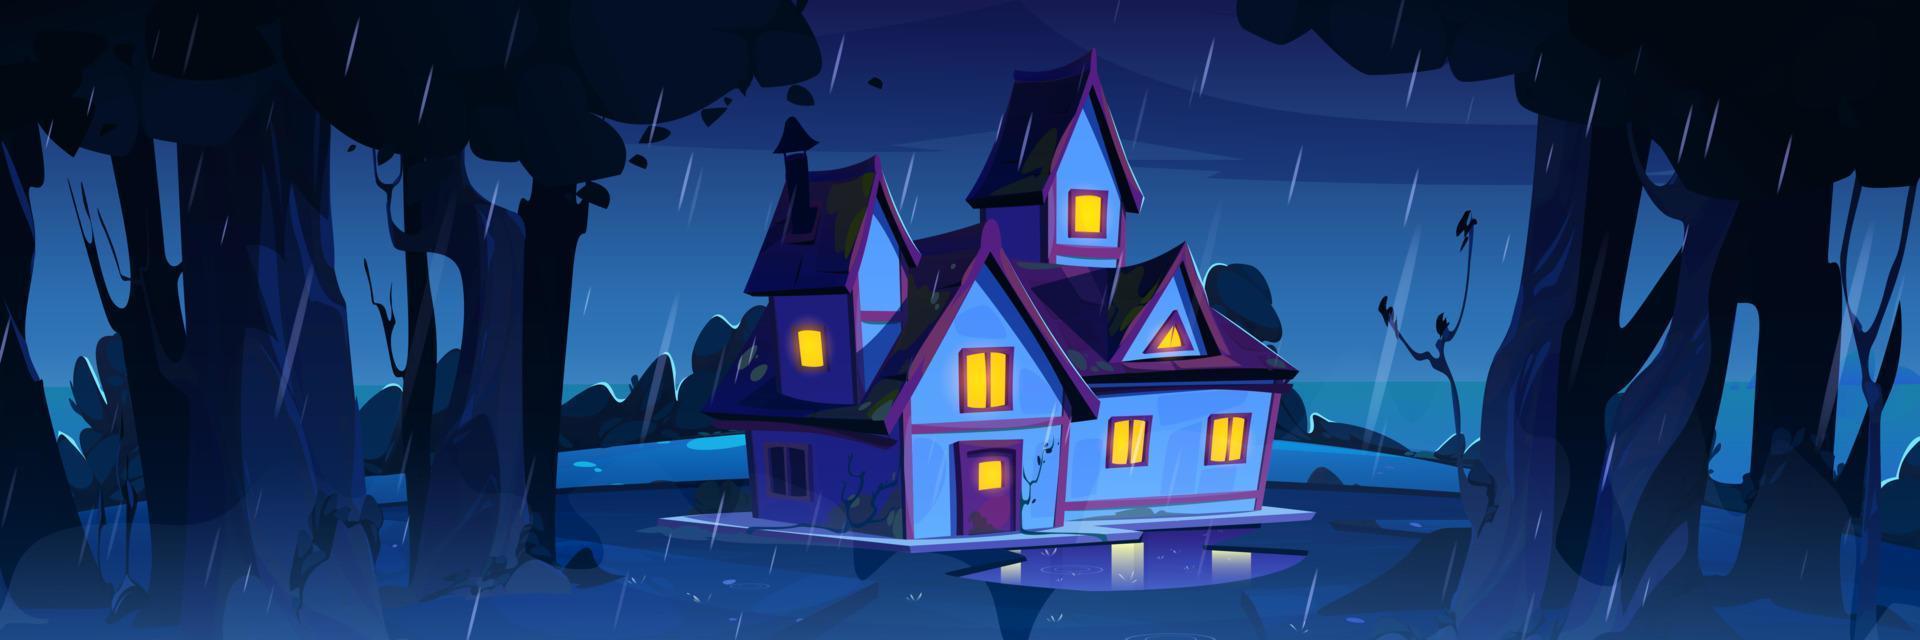 Night rainy landscape with forest, village house vector